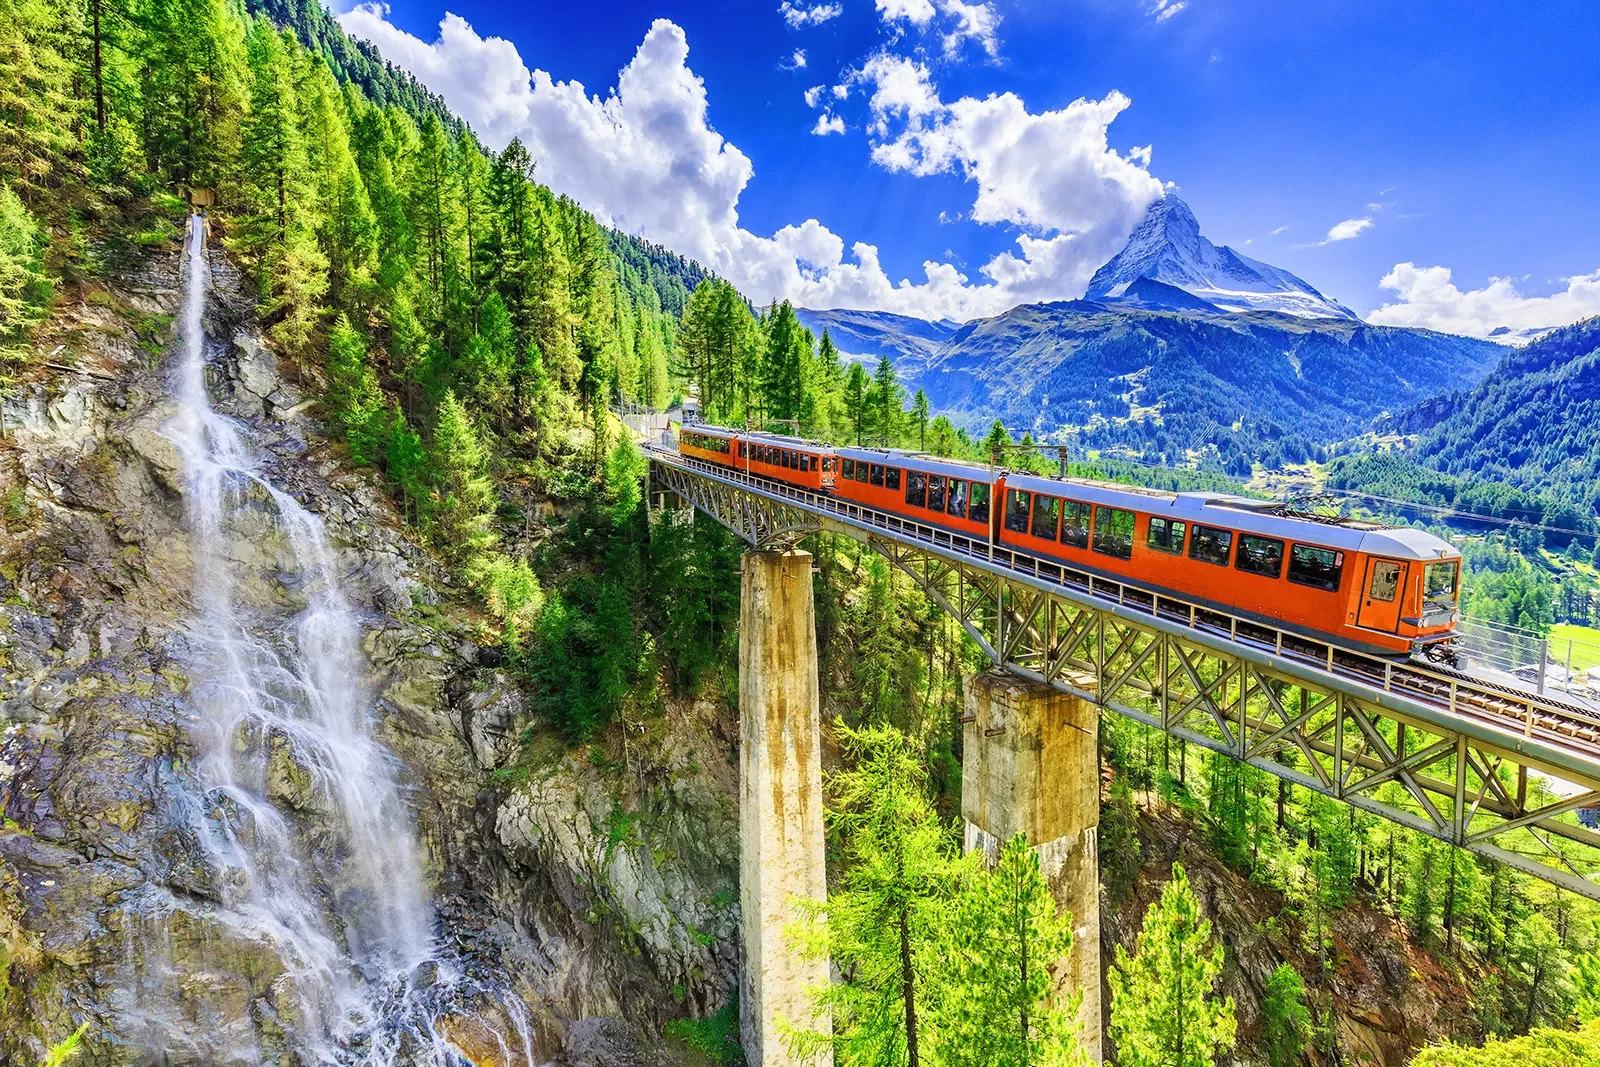 Wide shot of mountain train passing bridge, forest, mountains, sky in distance.